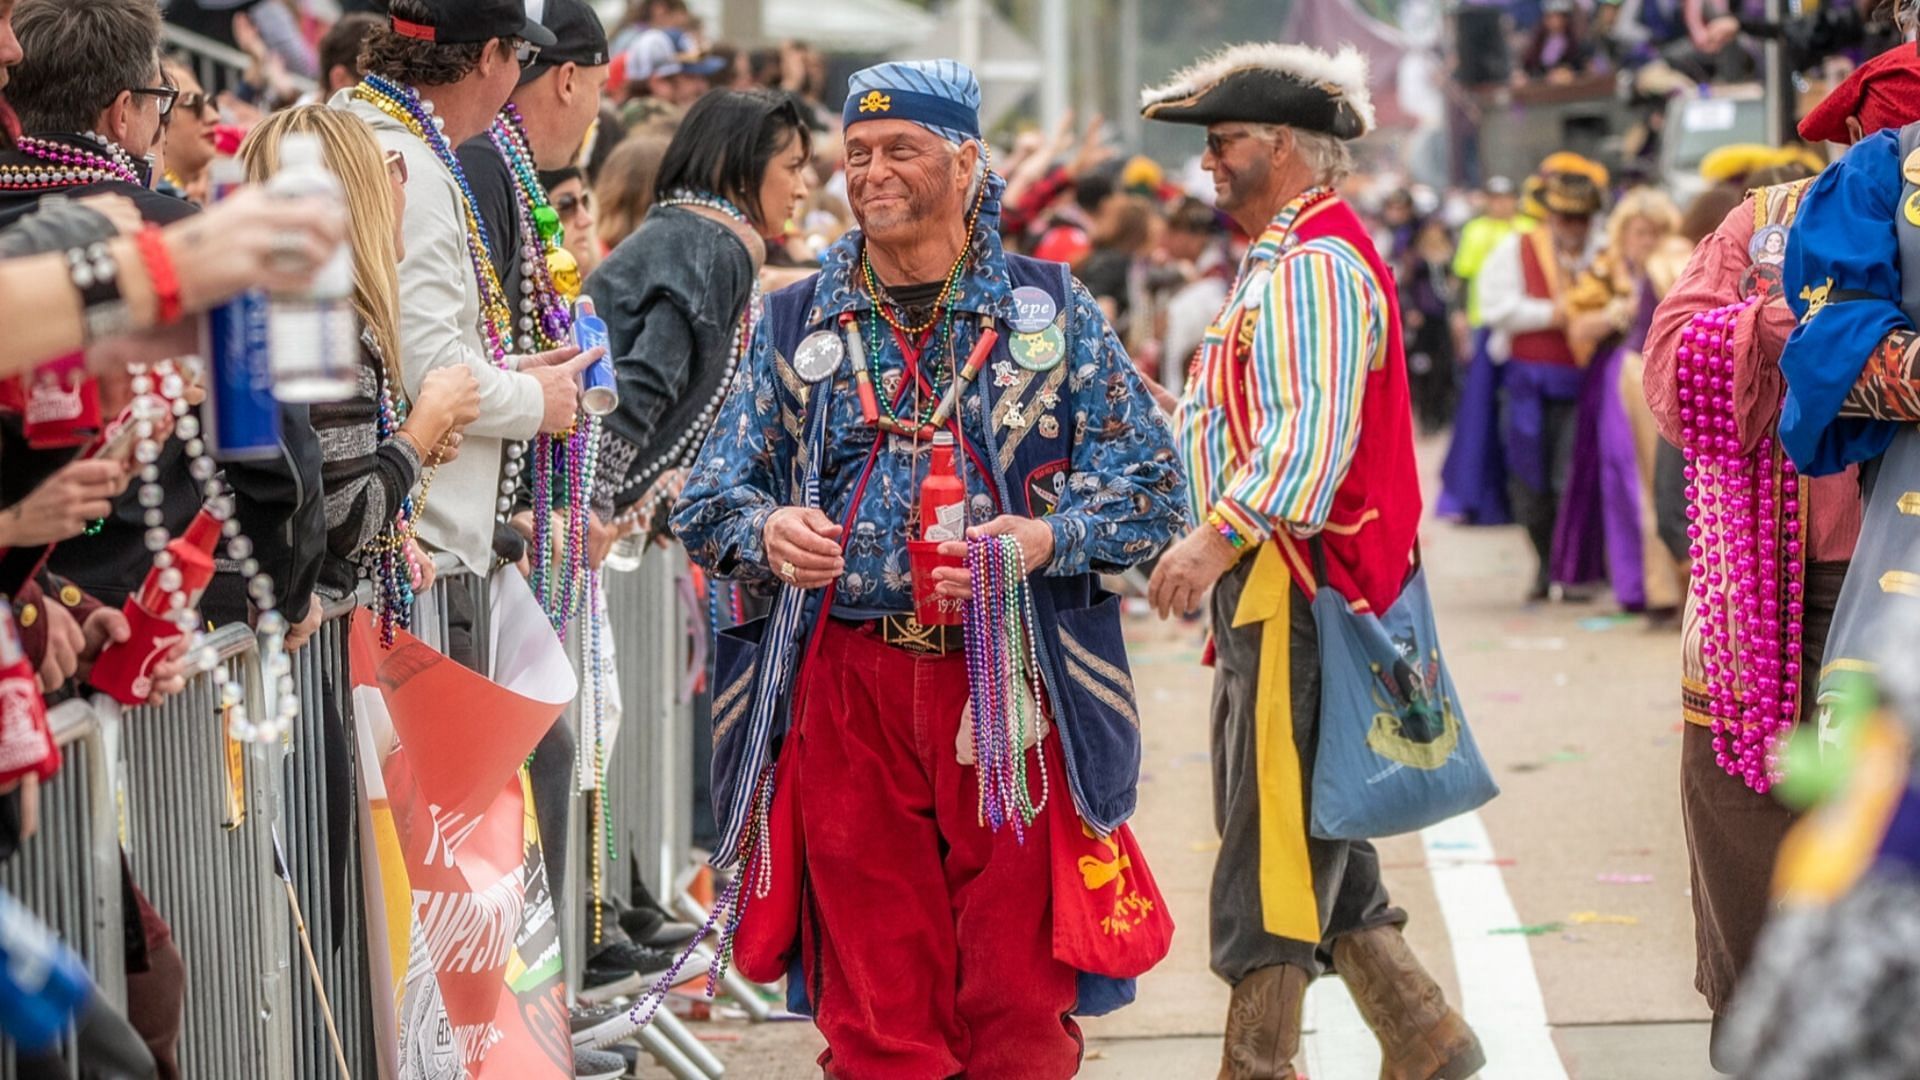 Gasparilla Pirate Fest 2023 Tickets, schedule, events and all you need